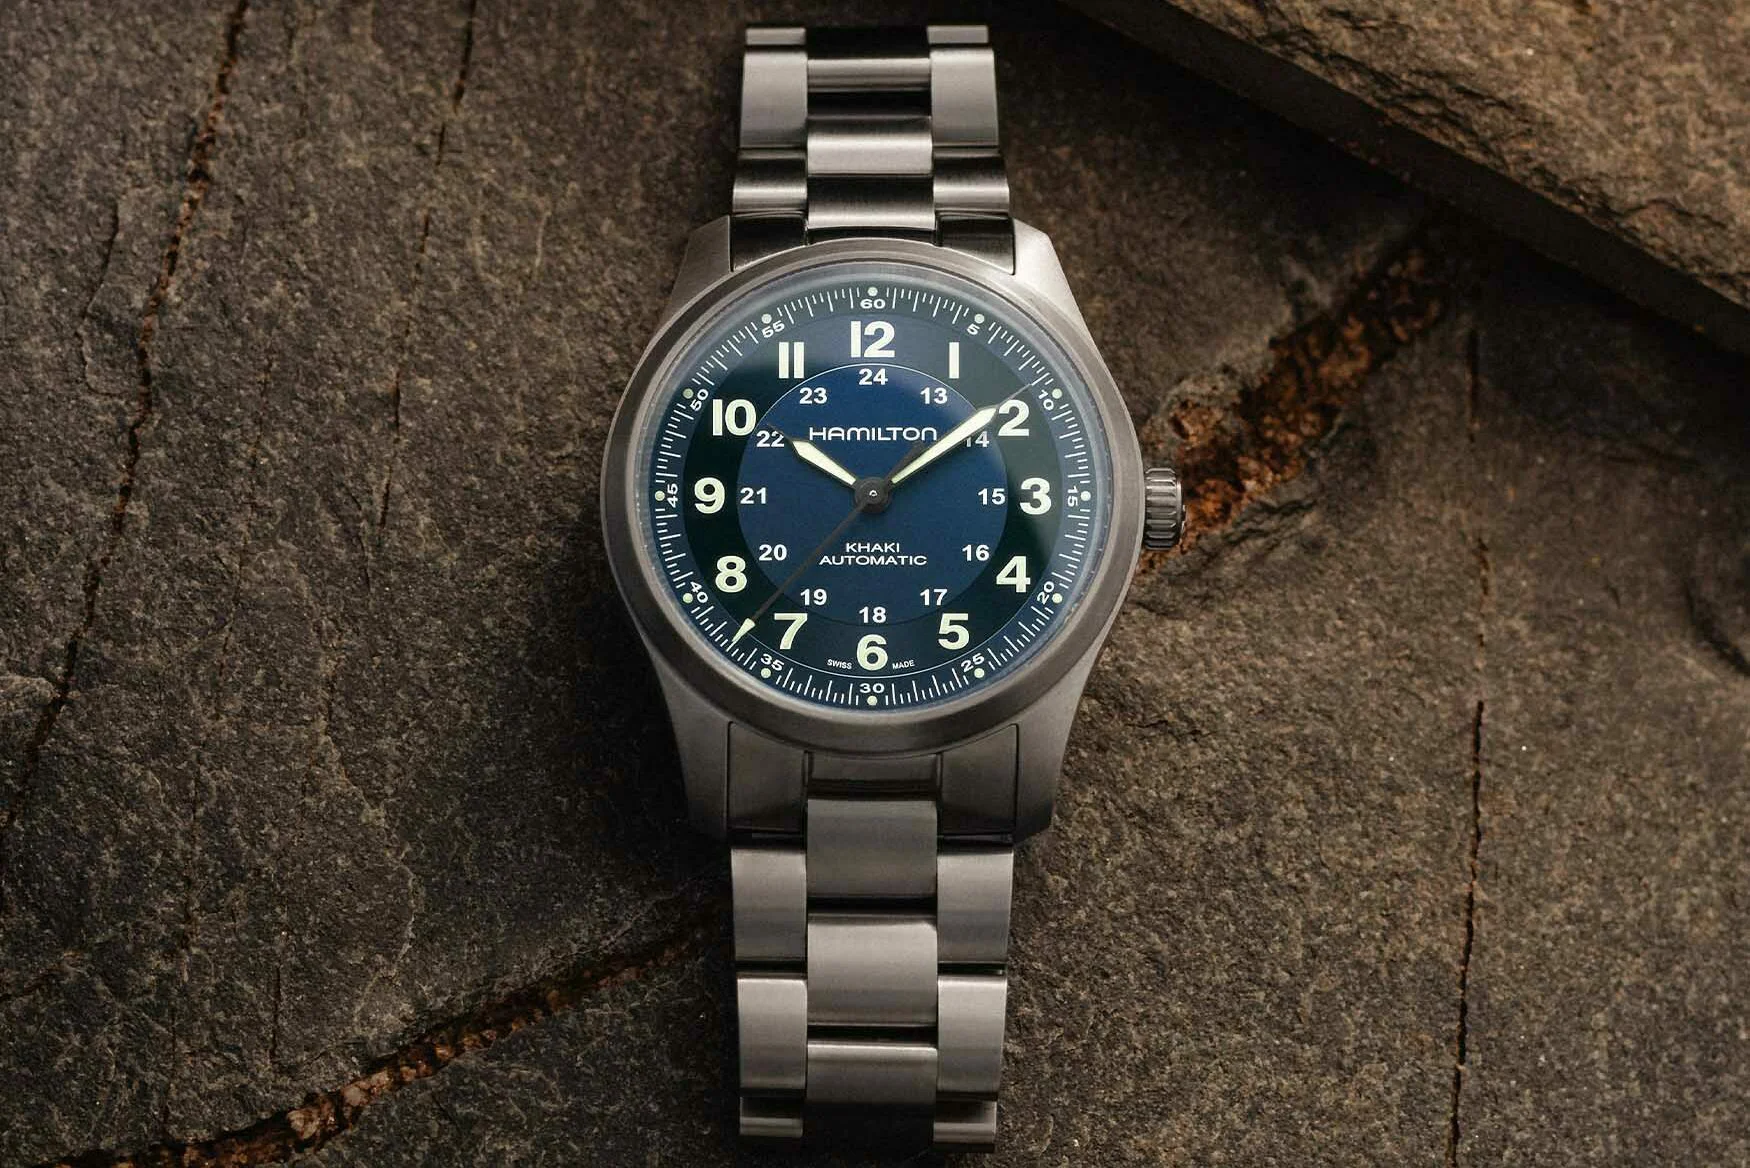 Seiko Should Bring Back its Classic, Affordable Field Watch | Gear Patrol